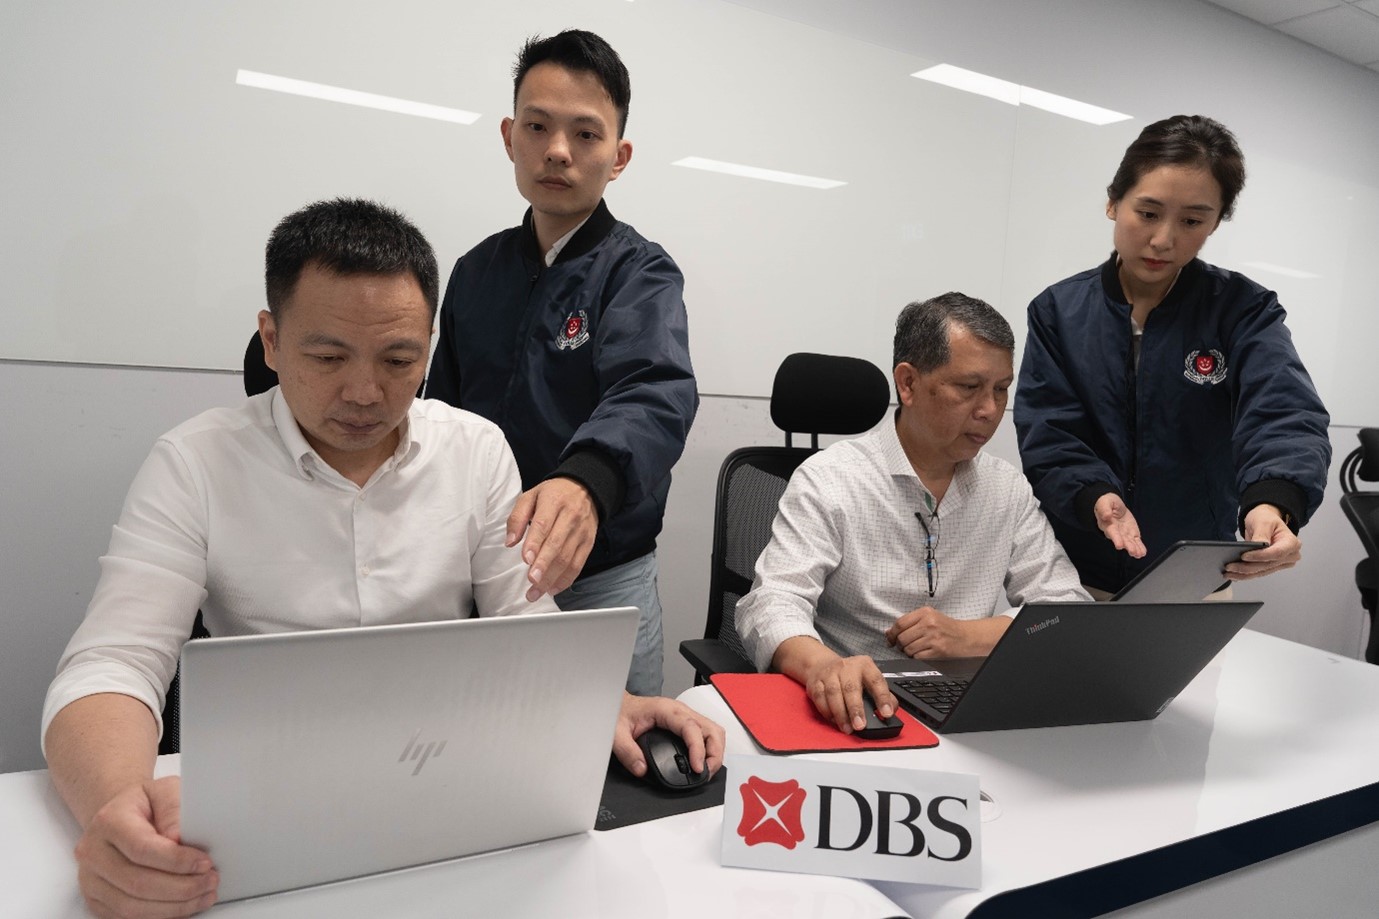 20230713_joint_operation_between_anti_scam_centre_and_dbs_bank_1